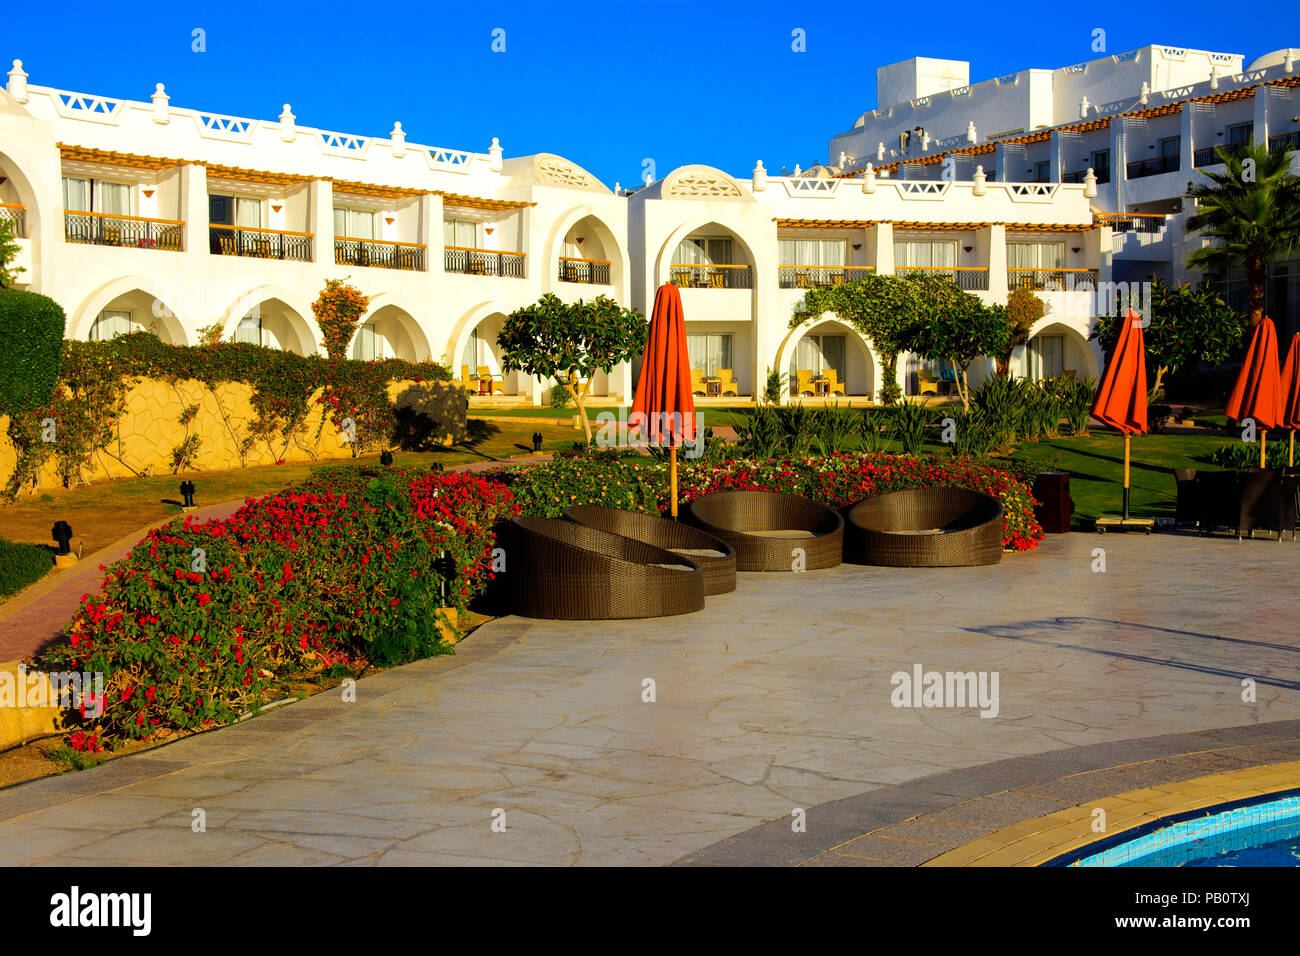 Sharm el-Sheikh, Egypt - March 14, 2018. The courtyards of a magnificent white hotel on a summer day. The concept of tourism, vacations and luxury rec Stock Photo